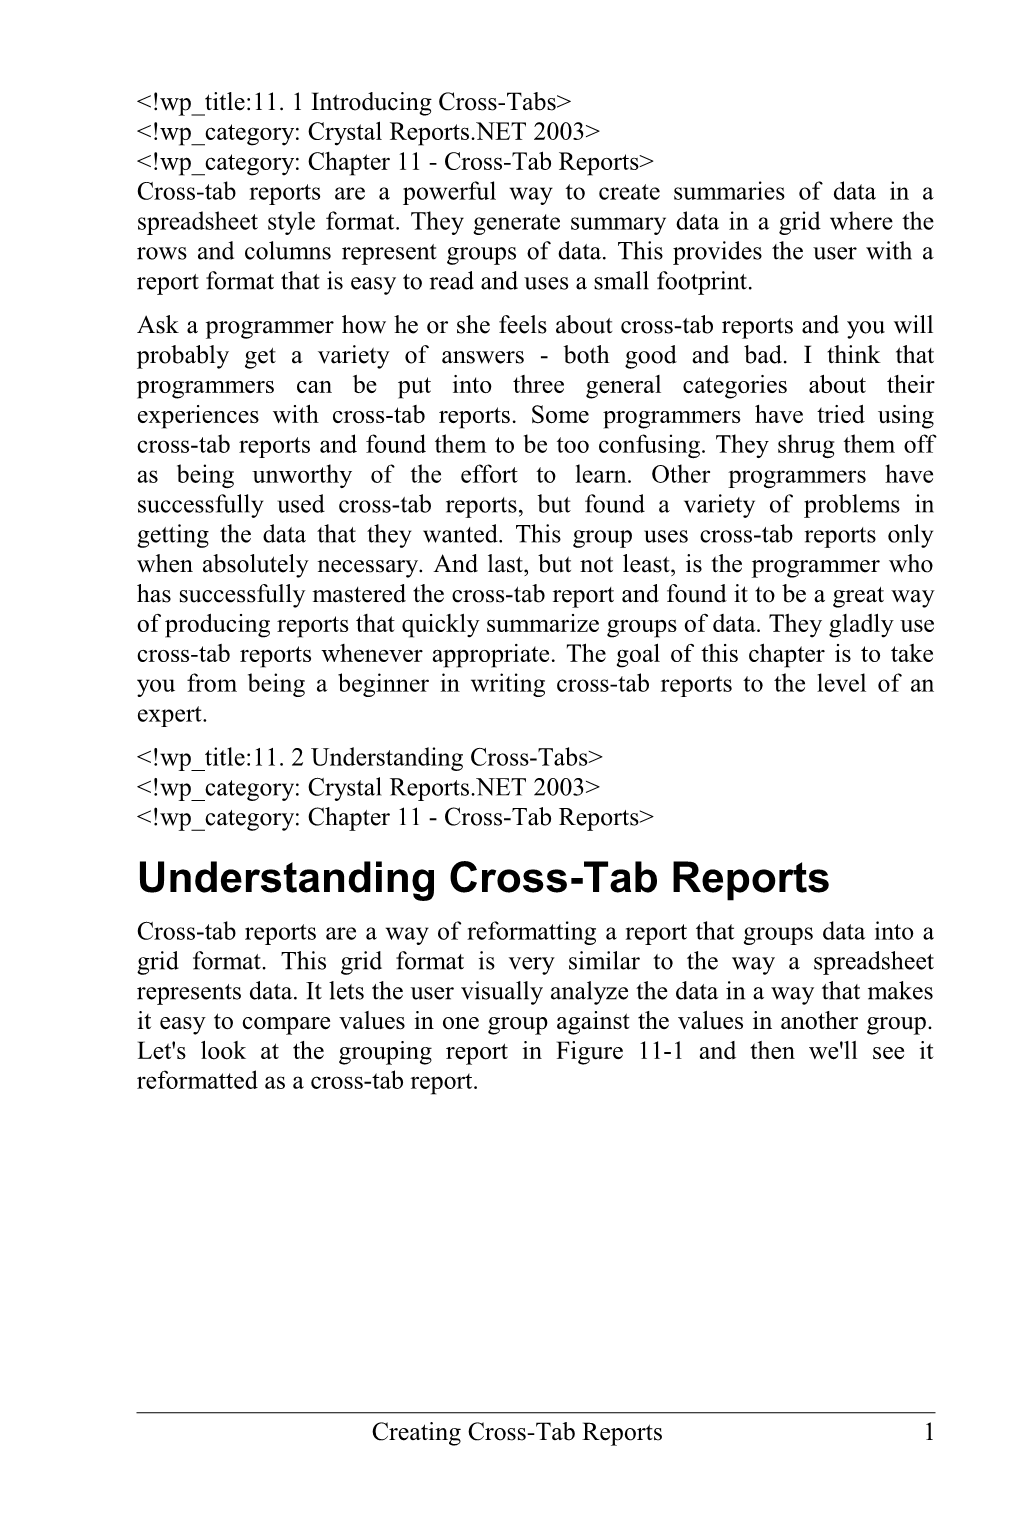 &lt;!Wp Title:11. 1 Introducing Cross-Tabs&gt;